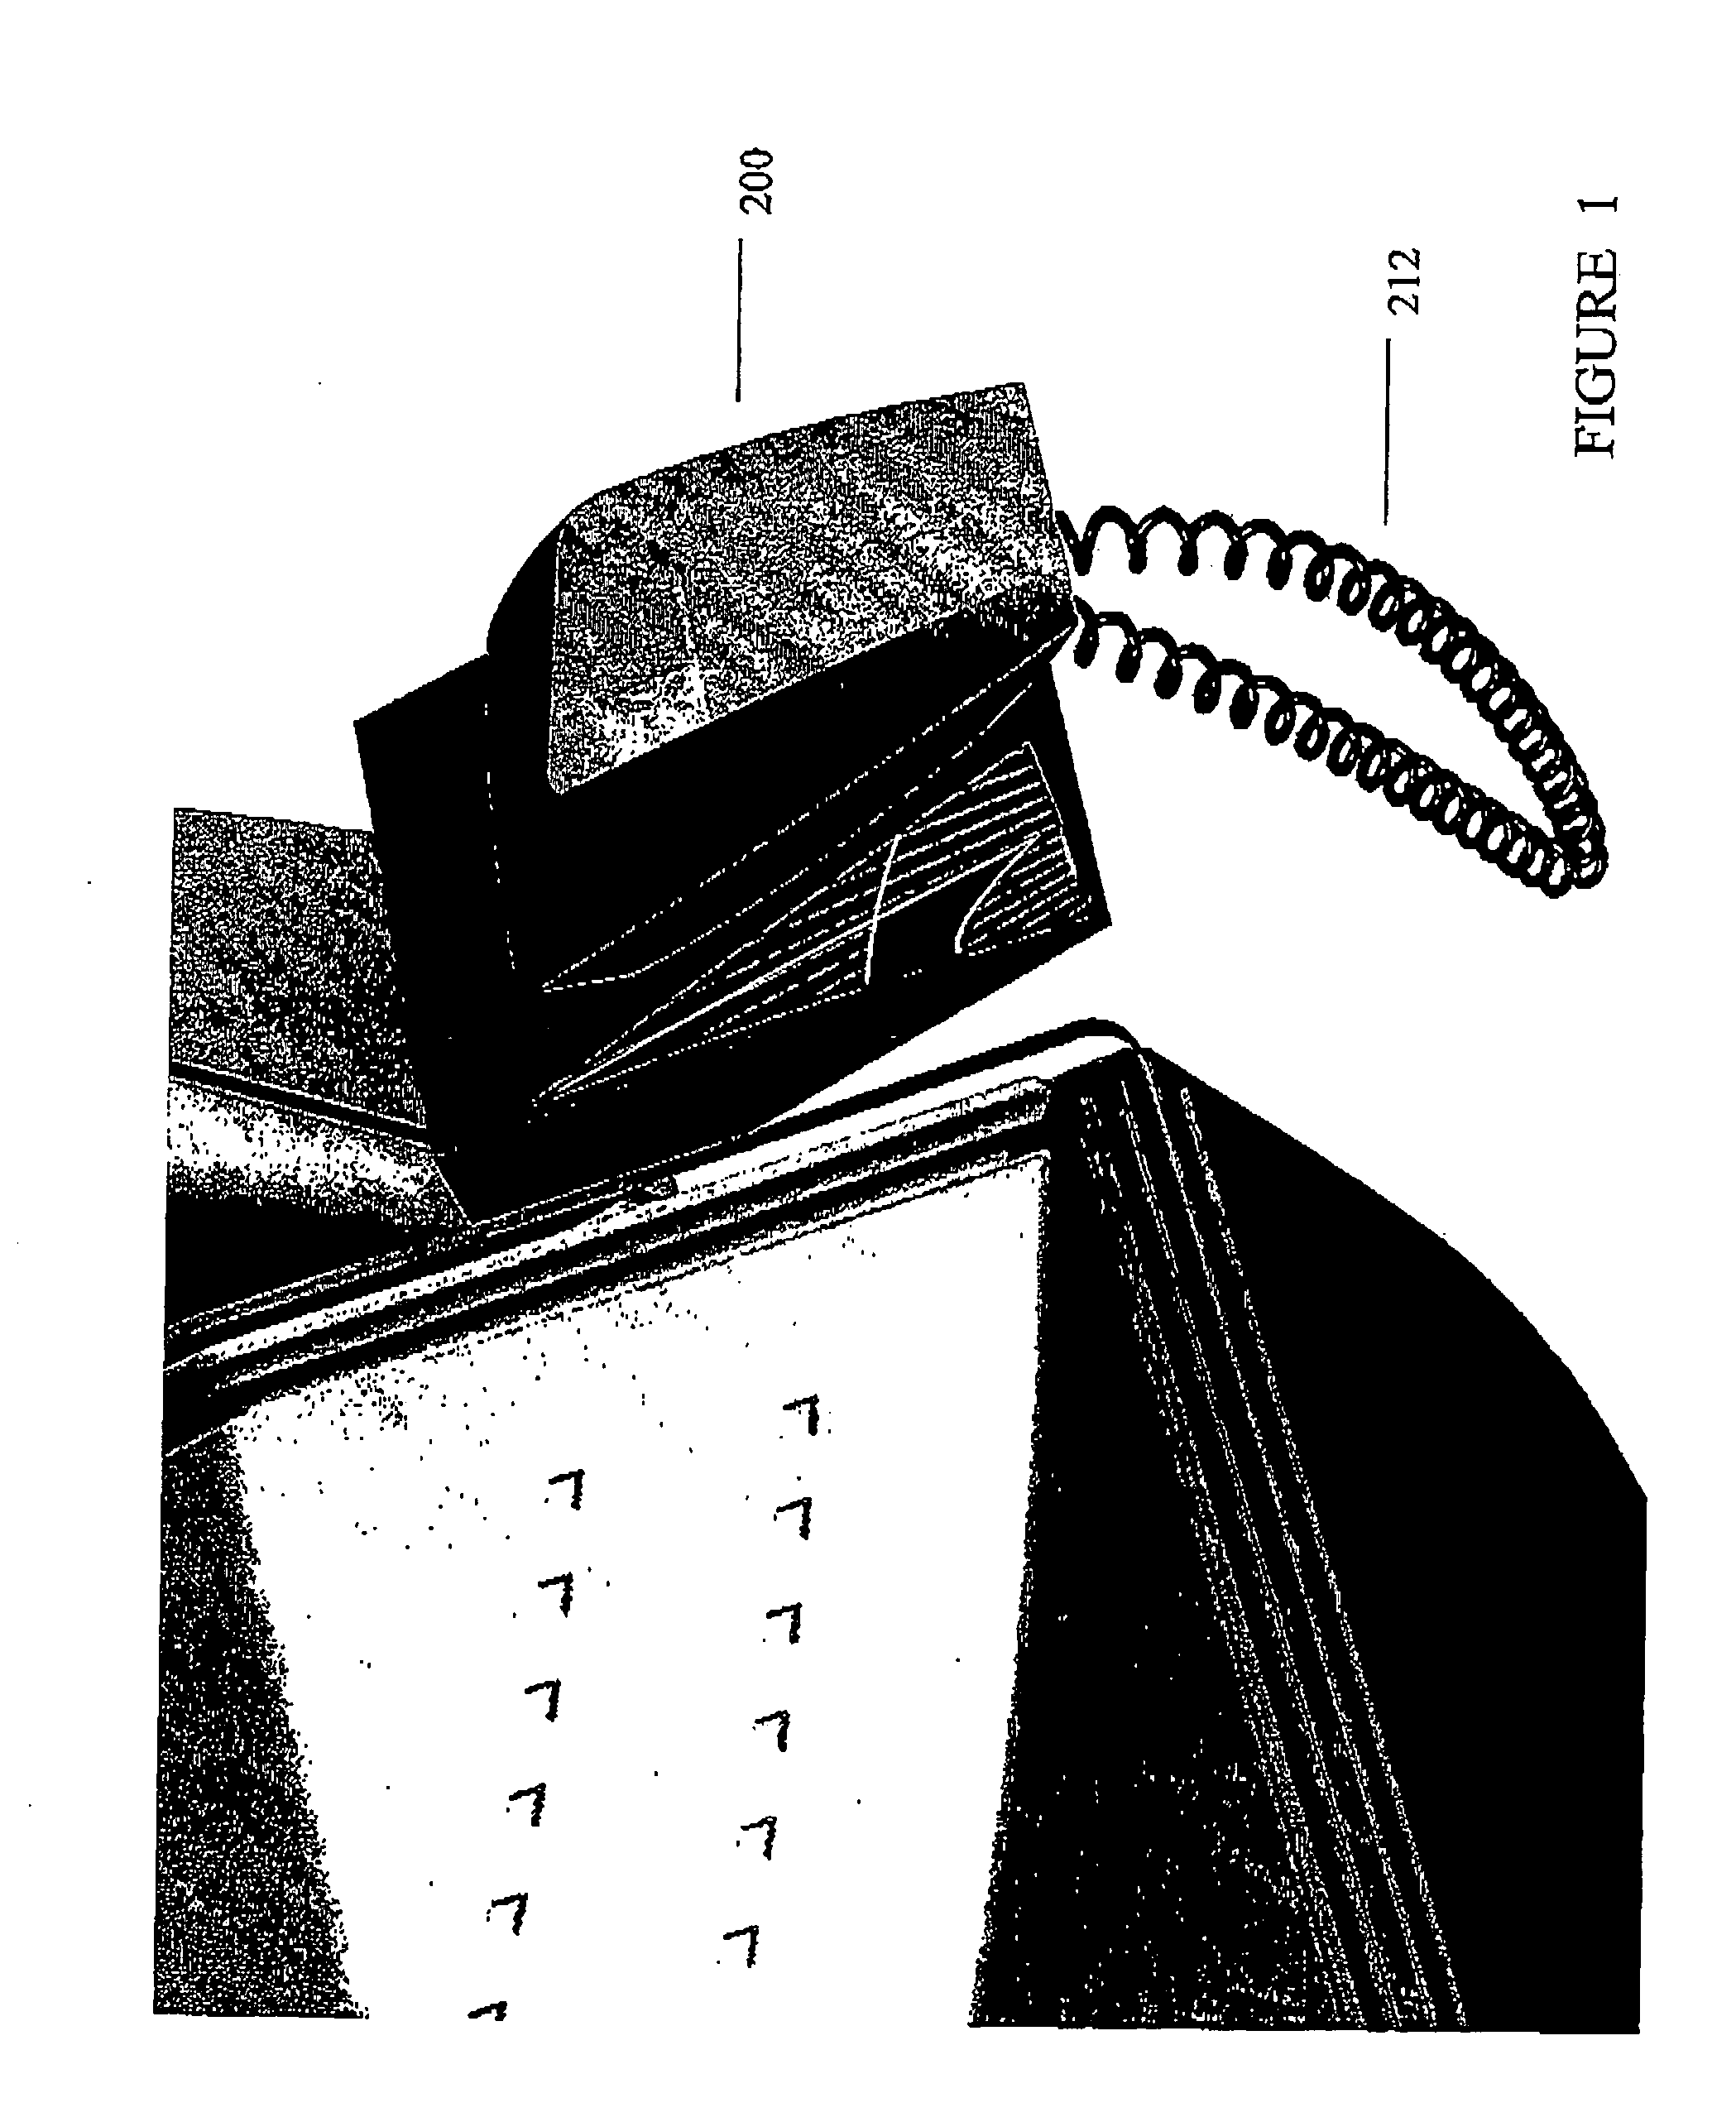 Device and process for a controlled irradiation of the human body